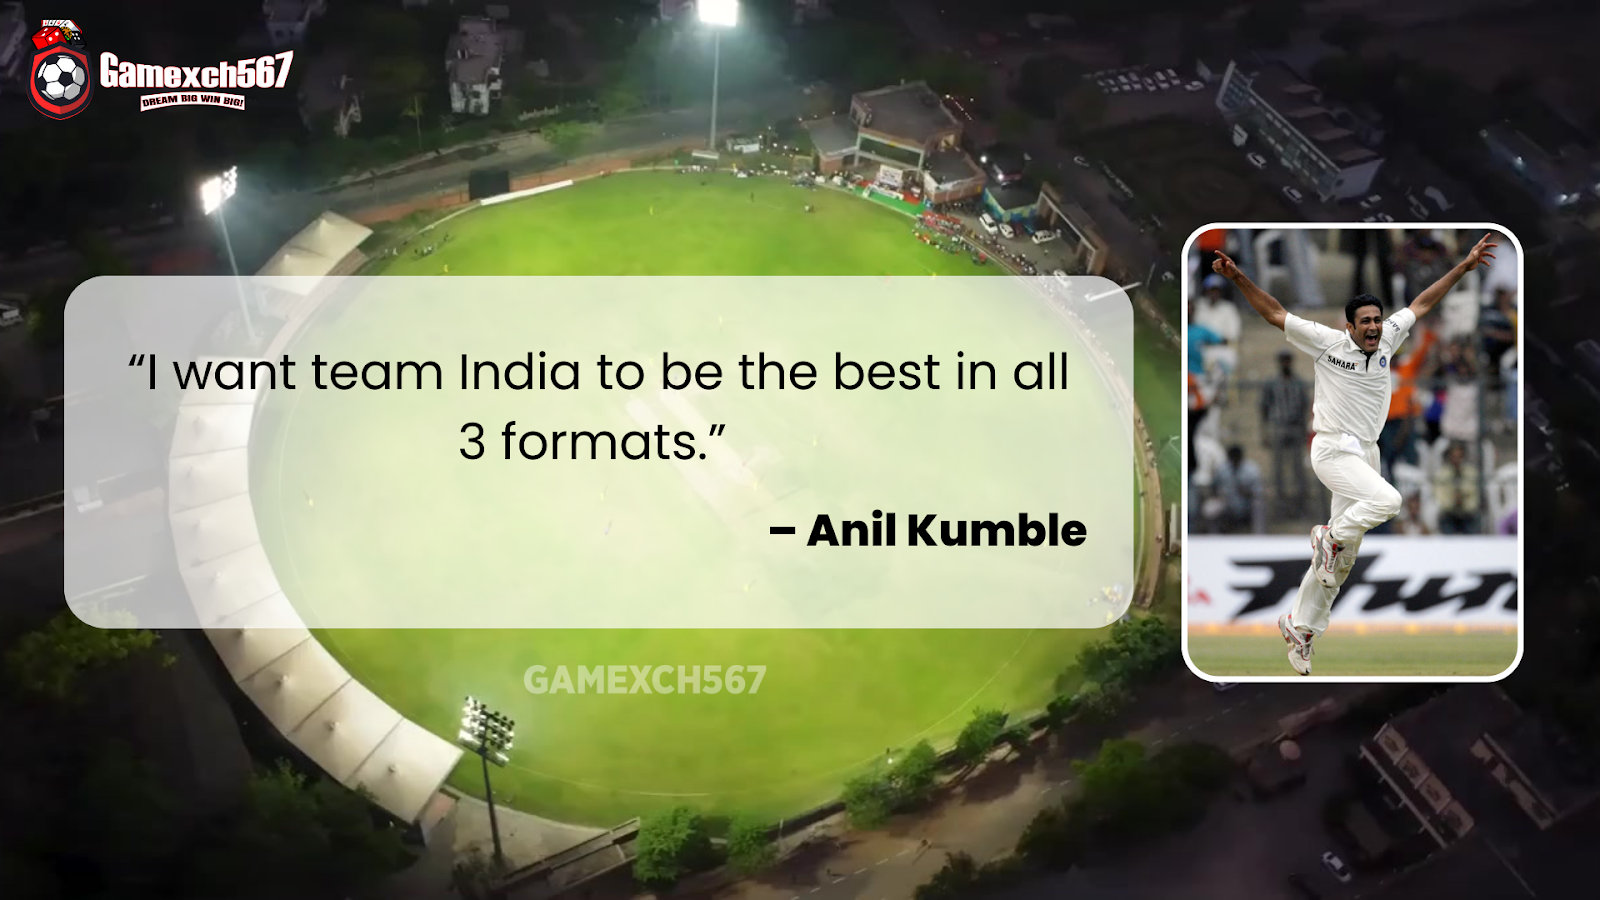  “I want team India to be the best in all 3 formats.” – Anil Kumble